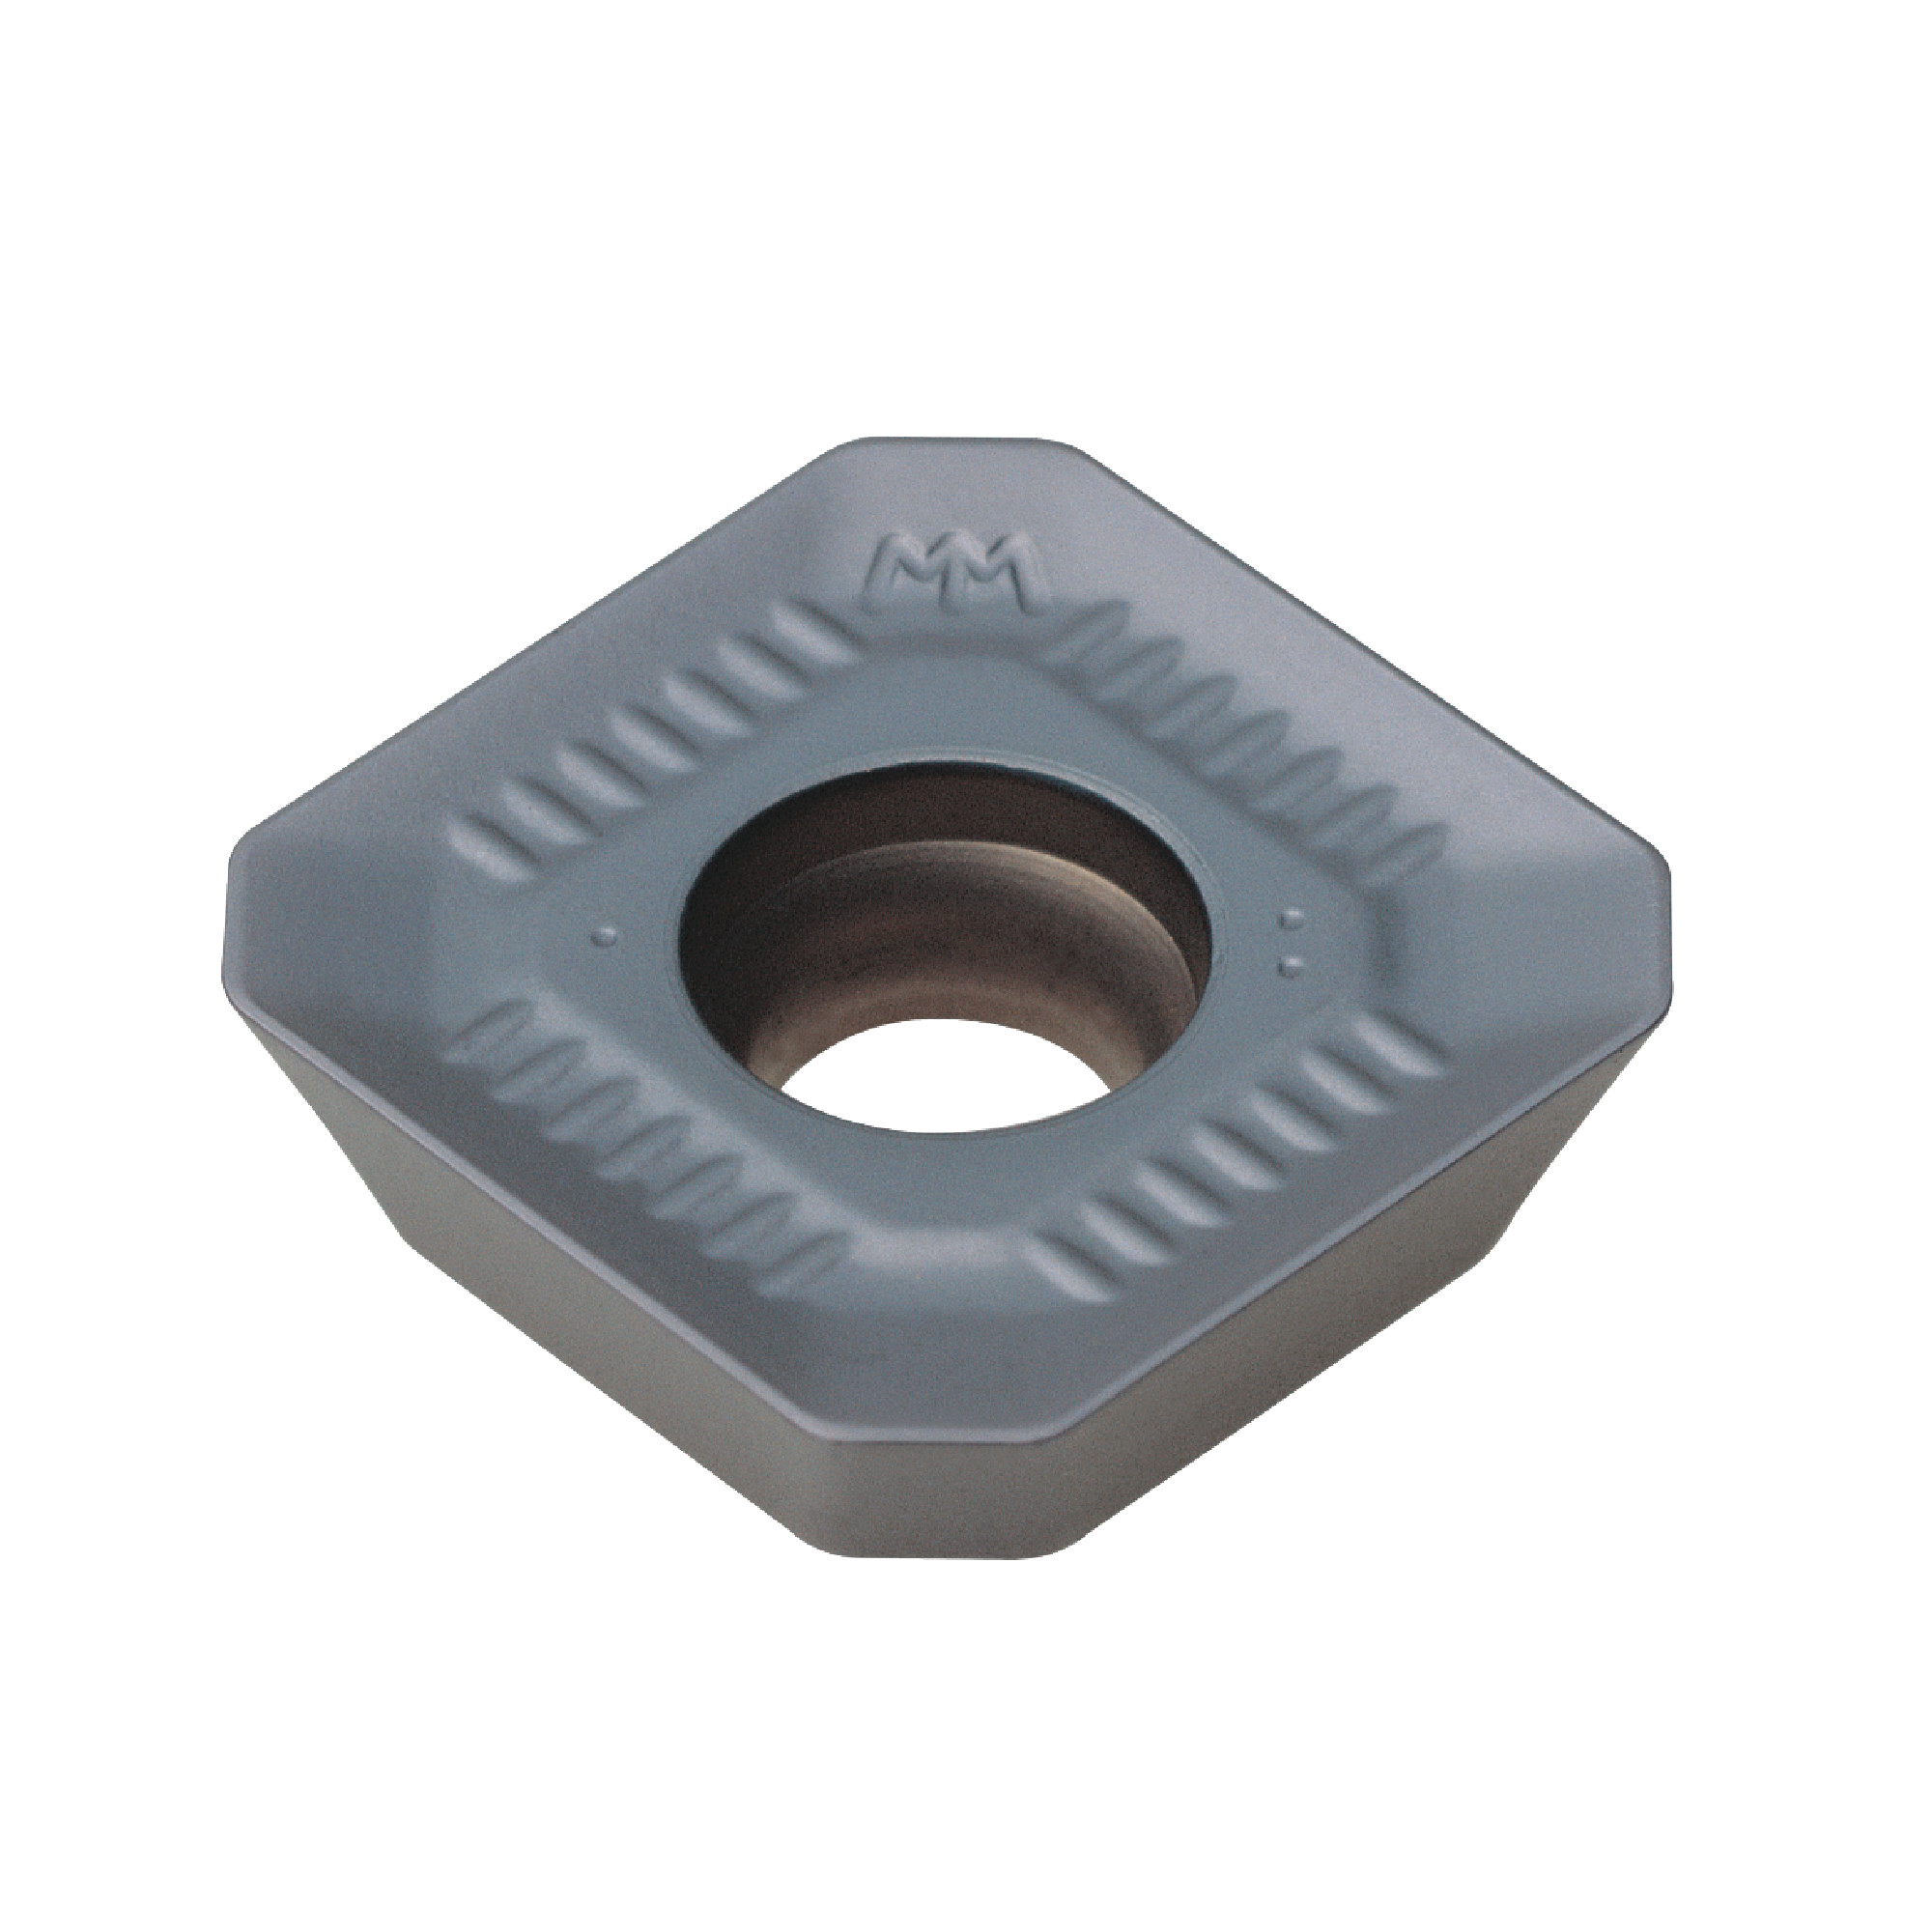 KORLOY - SEXT14M4AGSN-MM PC5300 Square / INDEXABLE Carbide MILLING INSERT